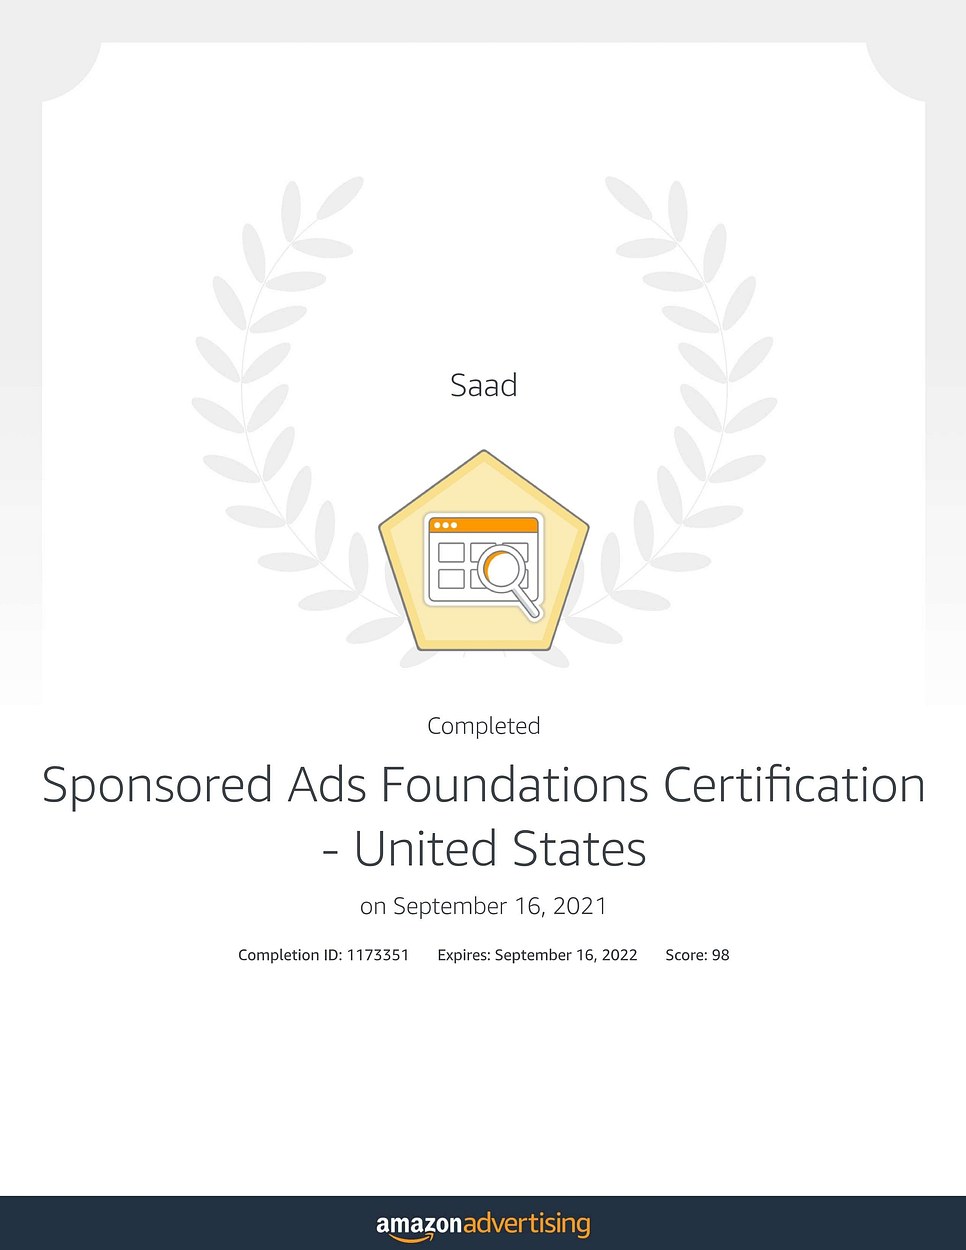 Sponsered Ads Foundations Certifications - United States